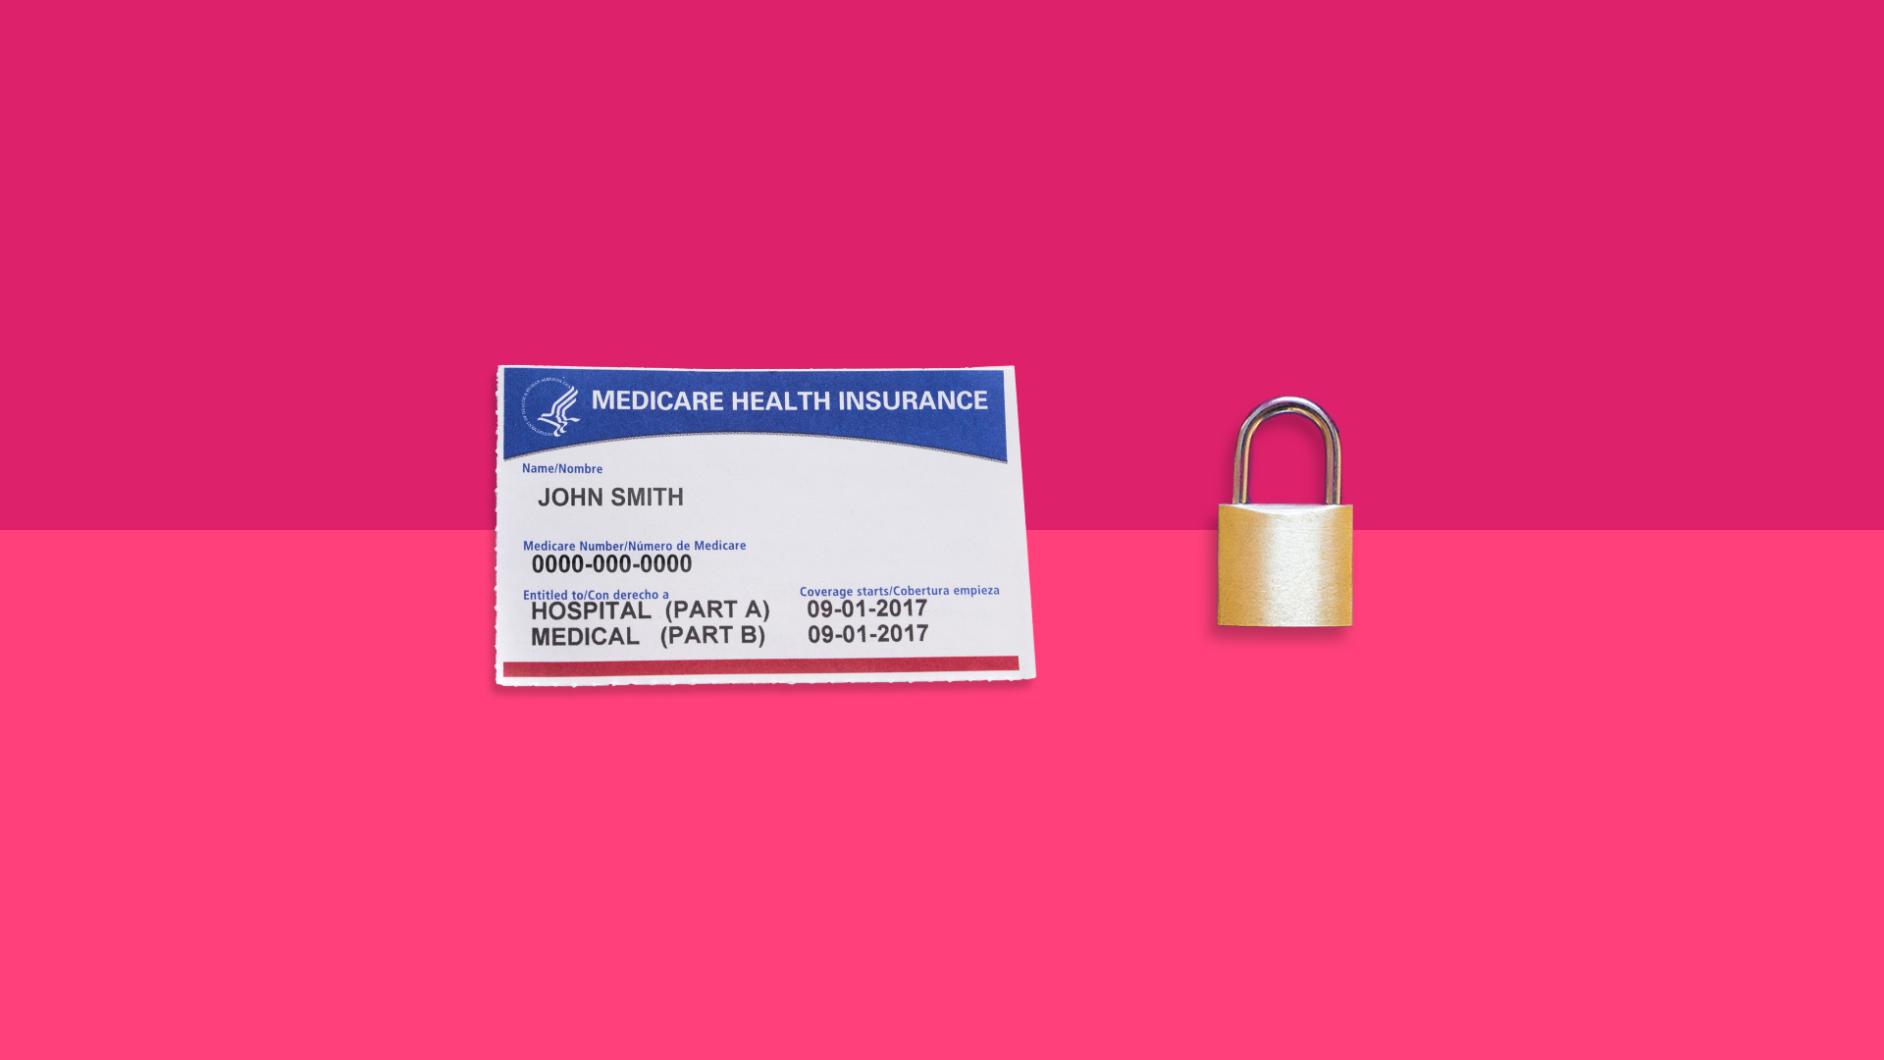 An image of a Medicare card and a lock symbolize Medicare fraud